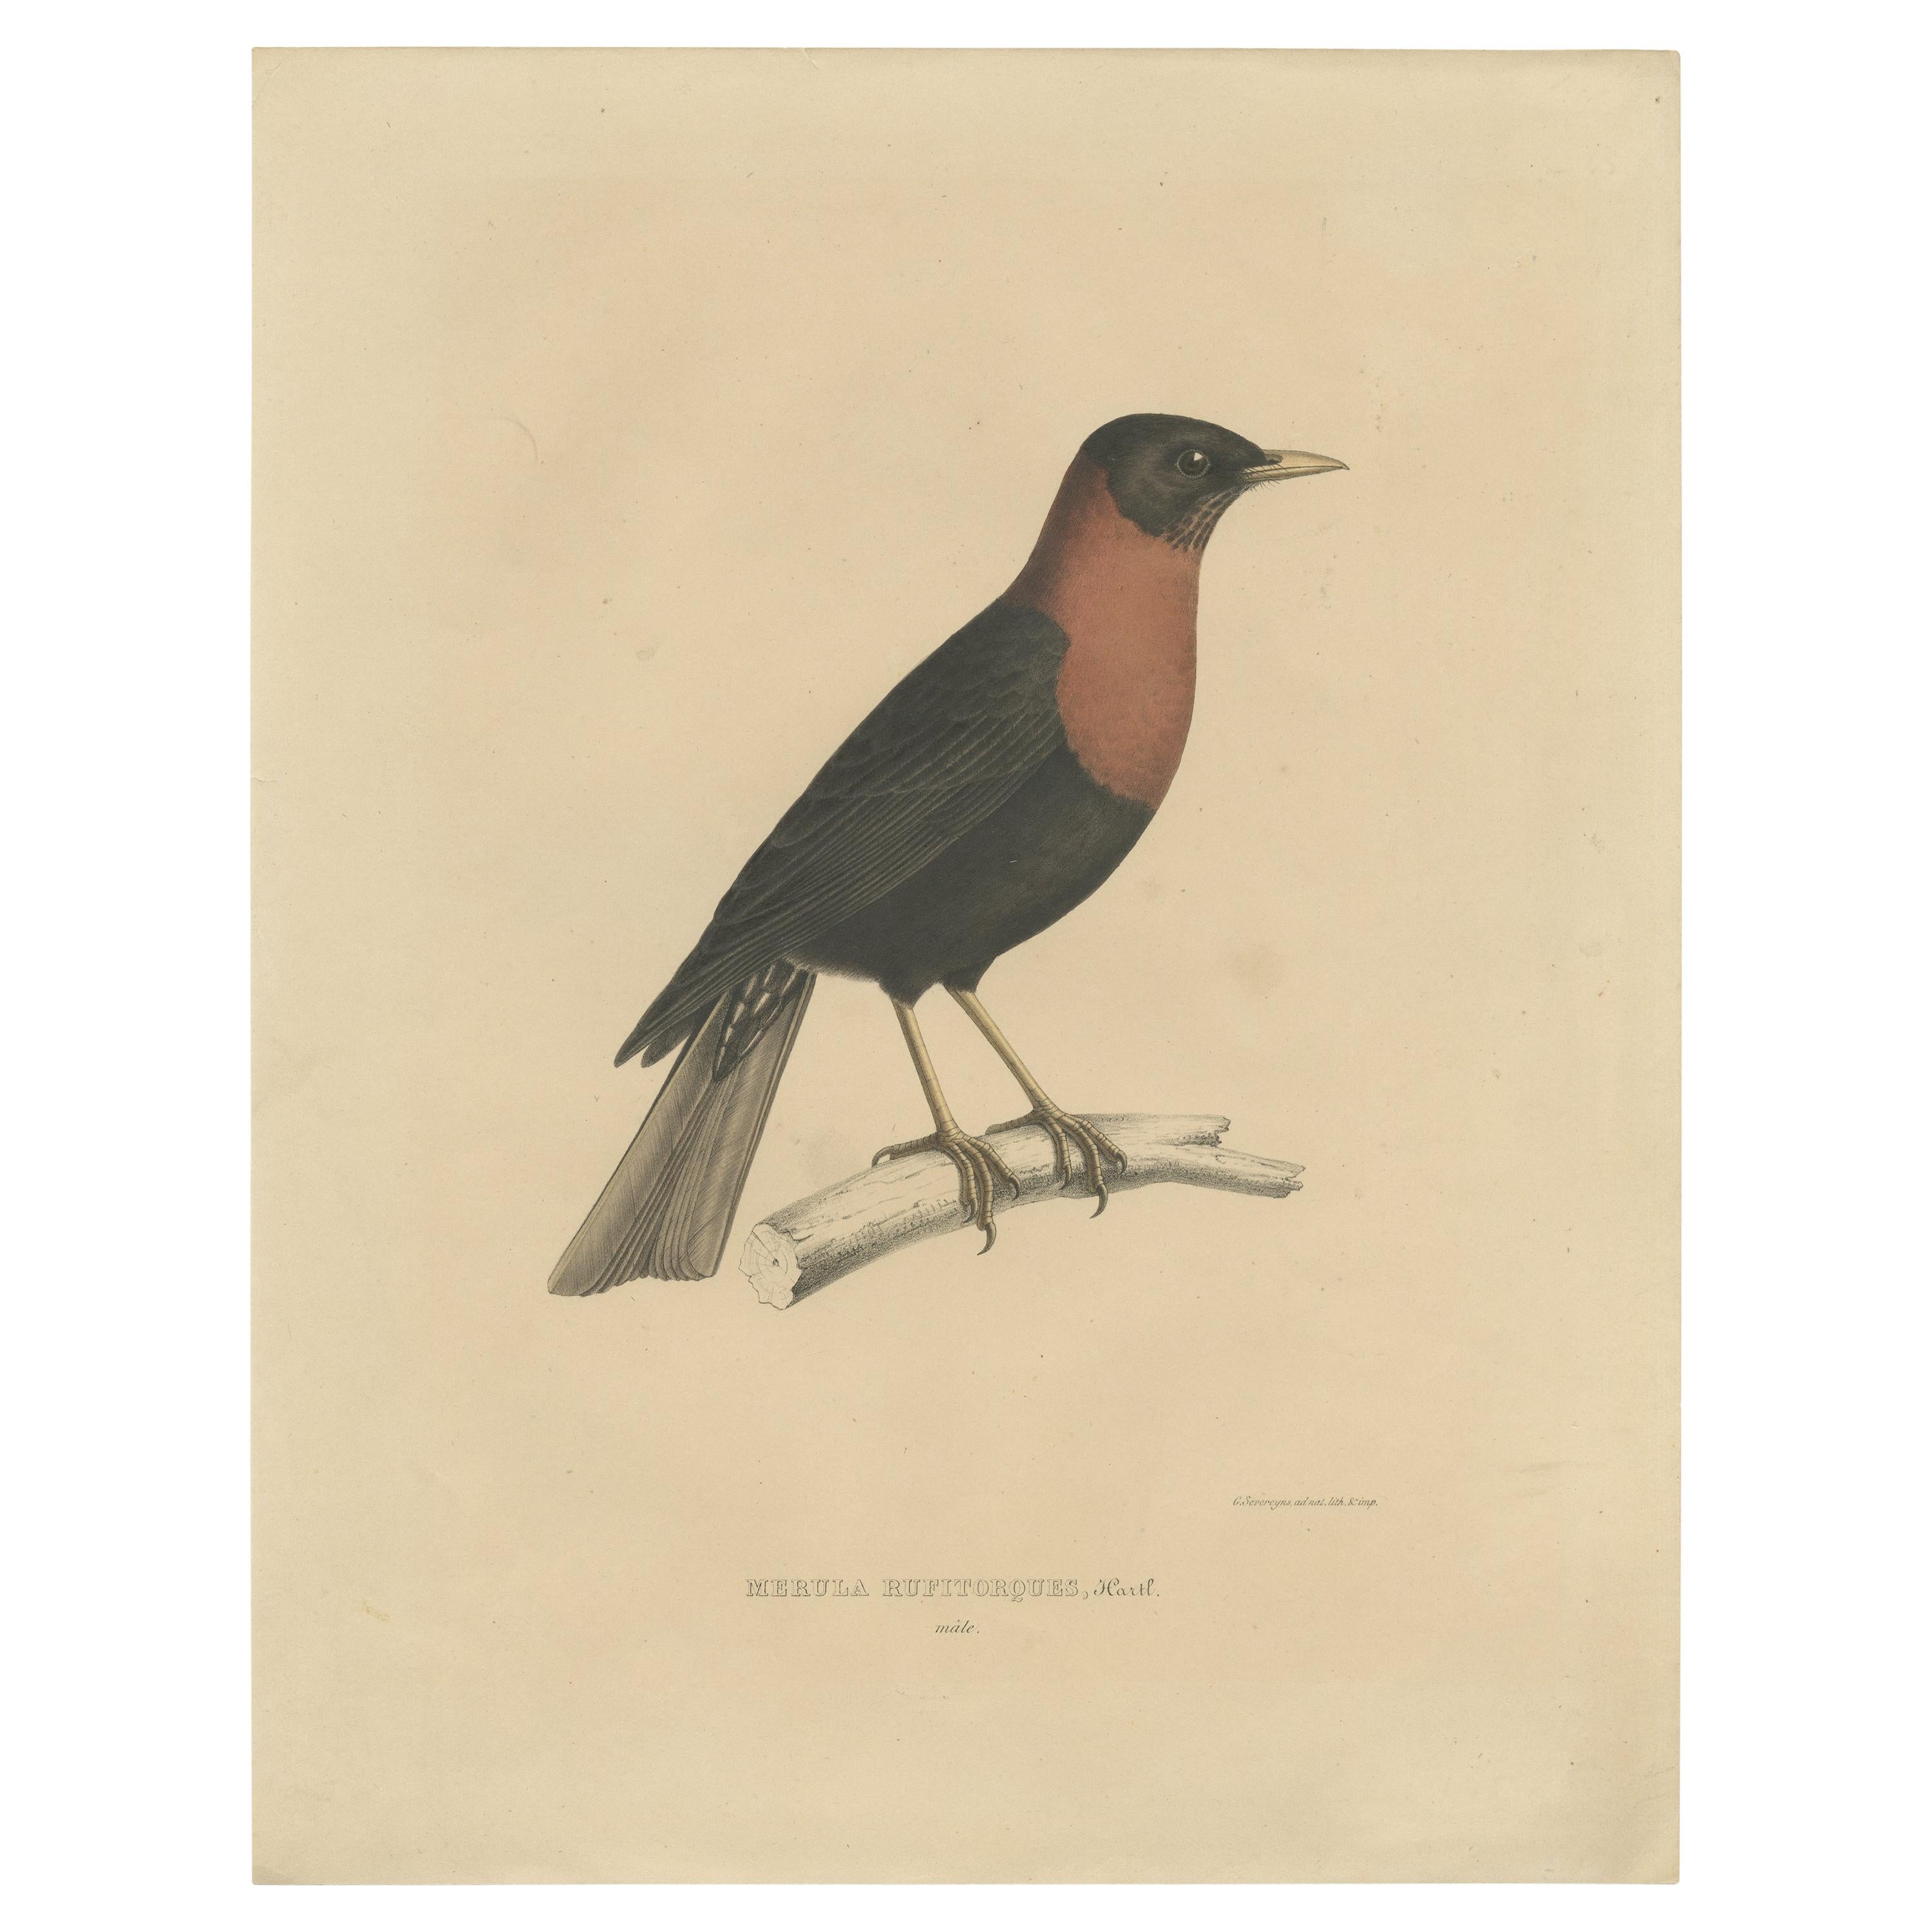 Antique Bird Print of a Rufous-Collared Thrush by Severeyns 'c.1850' For Sale